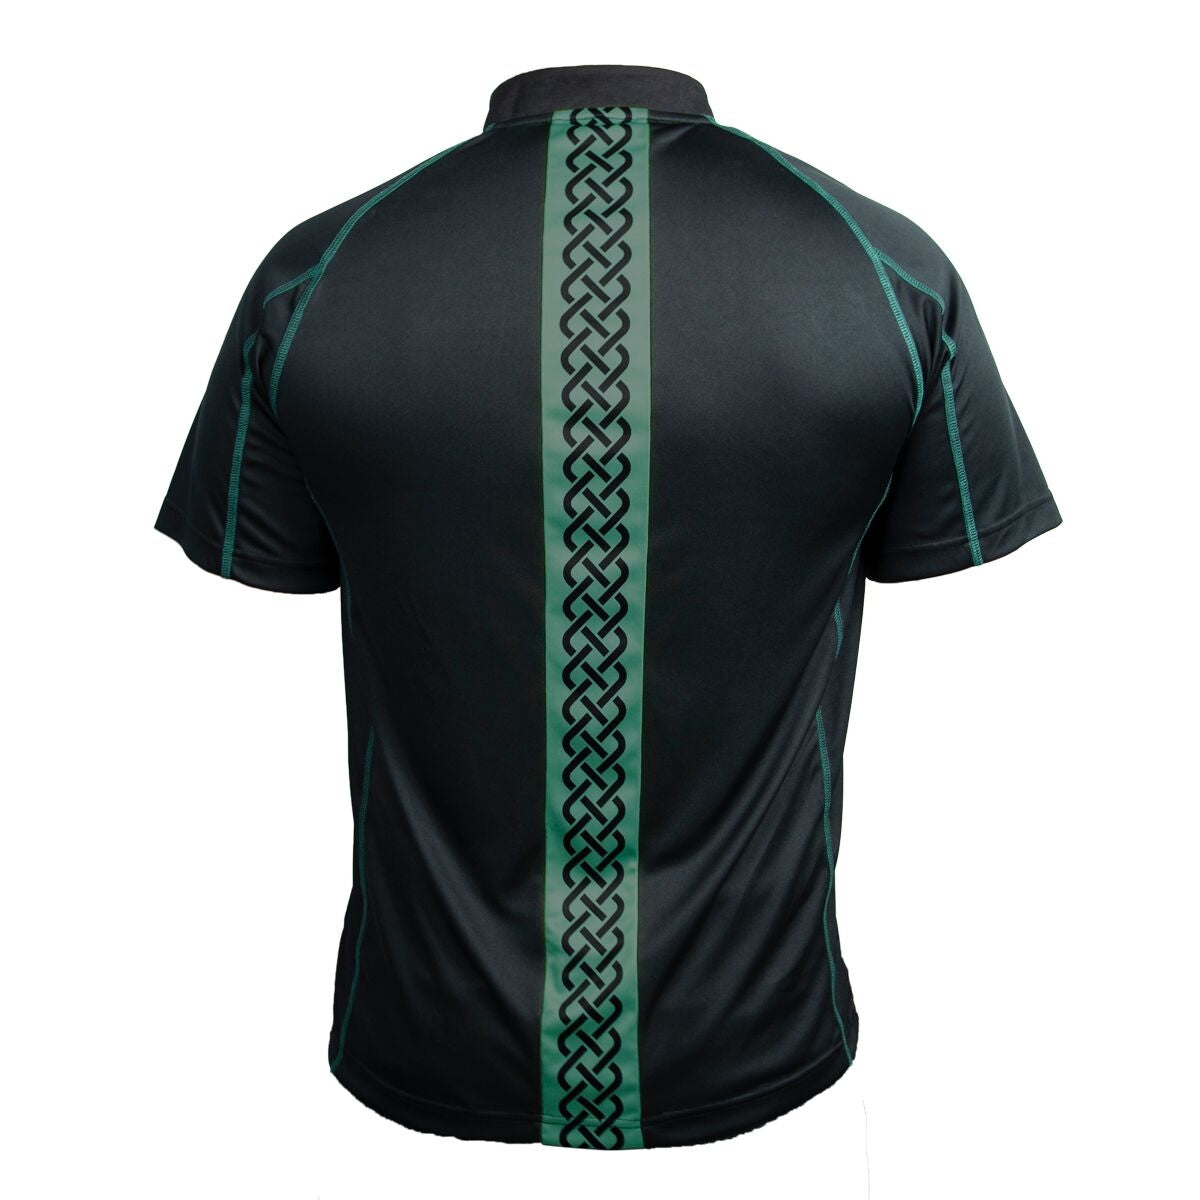 The back of a men's Guinness Black & Green Short Sleeve Rugby Jersey with the Guinness logo.